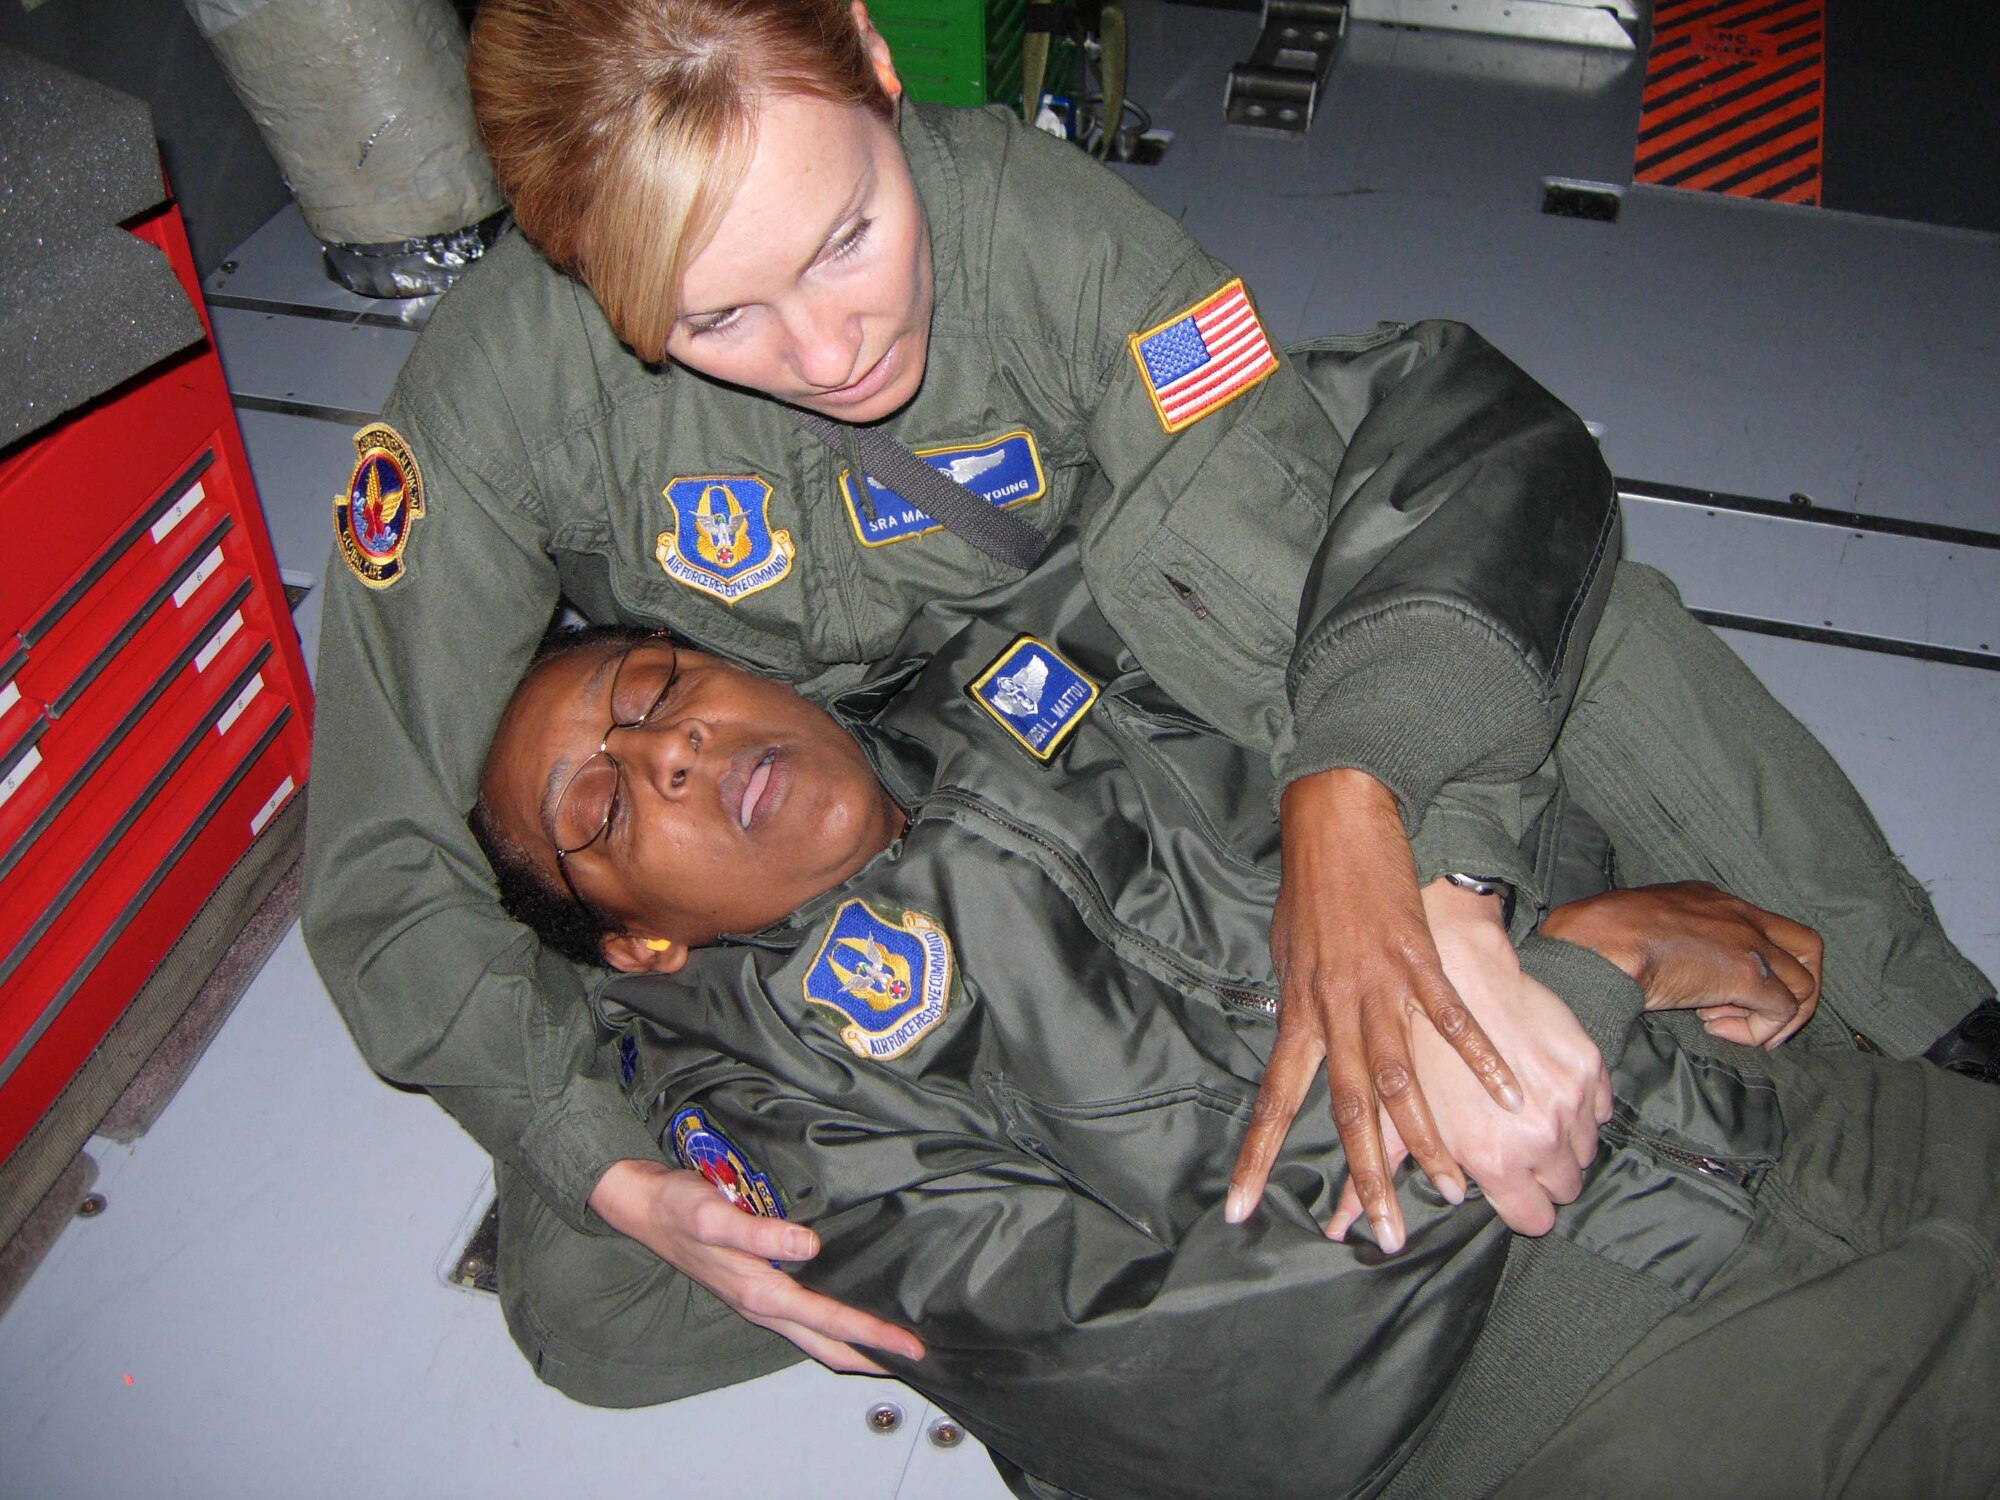 ST. CROIX, U.S.VIRGIN ISLANDS -- Senior Airman Mary Elizabeth Young, 439th Aeromedical Evacuation Squadron medical technician, subdues simulated patient Lt. Col. Vanessa Mattox, 459th Aeromedical Evacuation Squadron commander, during an in-flight exercise. Ten members of the 439th AES joined 459th AES members in a blended AE training mission to the island. Mission training expanded beyond the medical realm to include air refueling and an overseas sortie. (U.S. Air Force photo/Staff Sgt. Amaani Lyle)